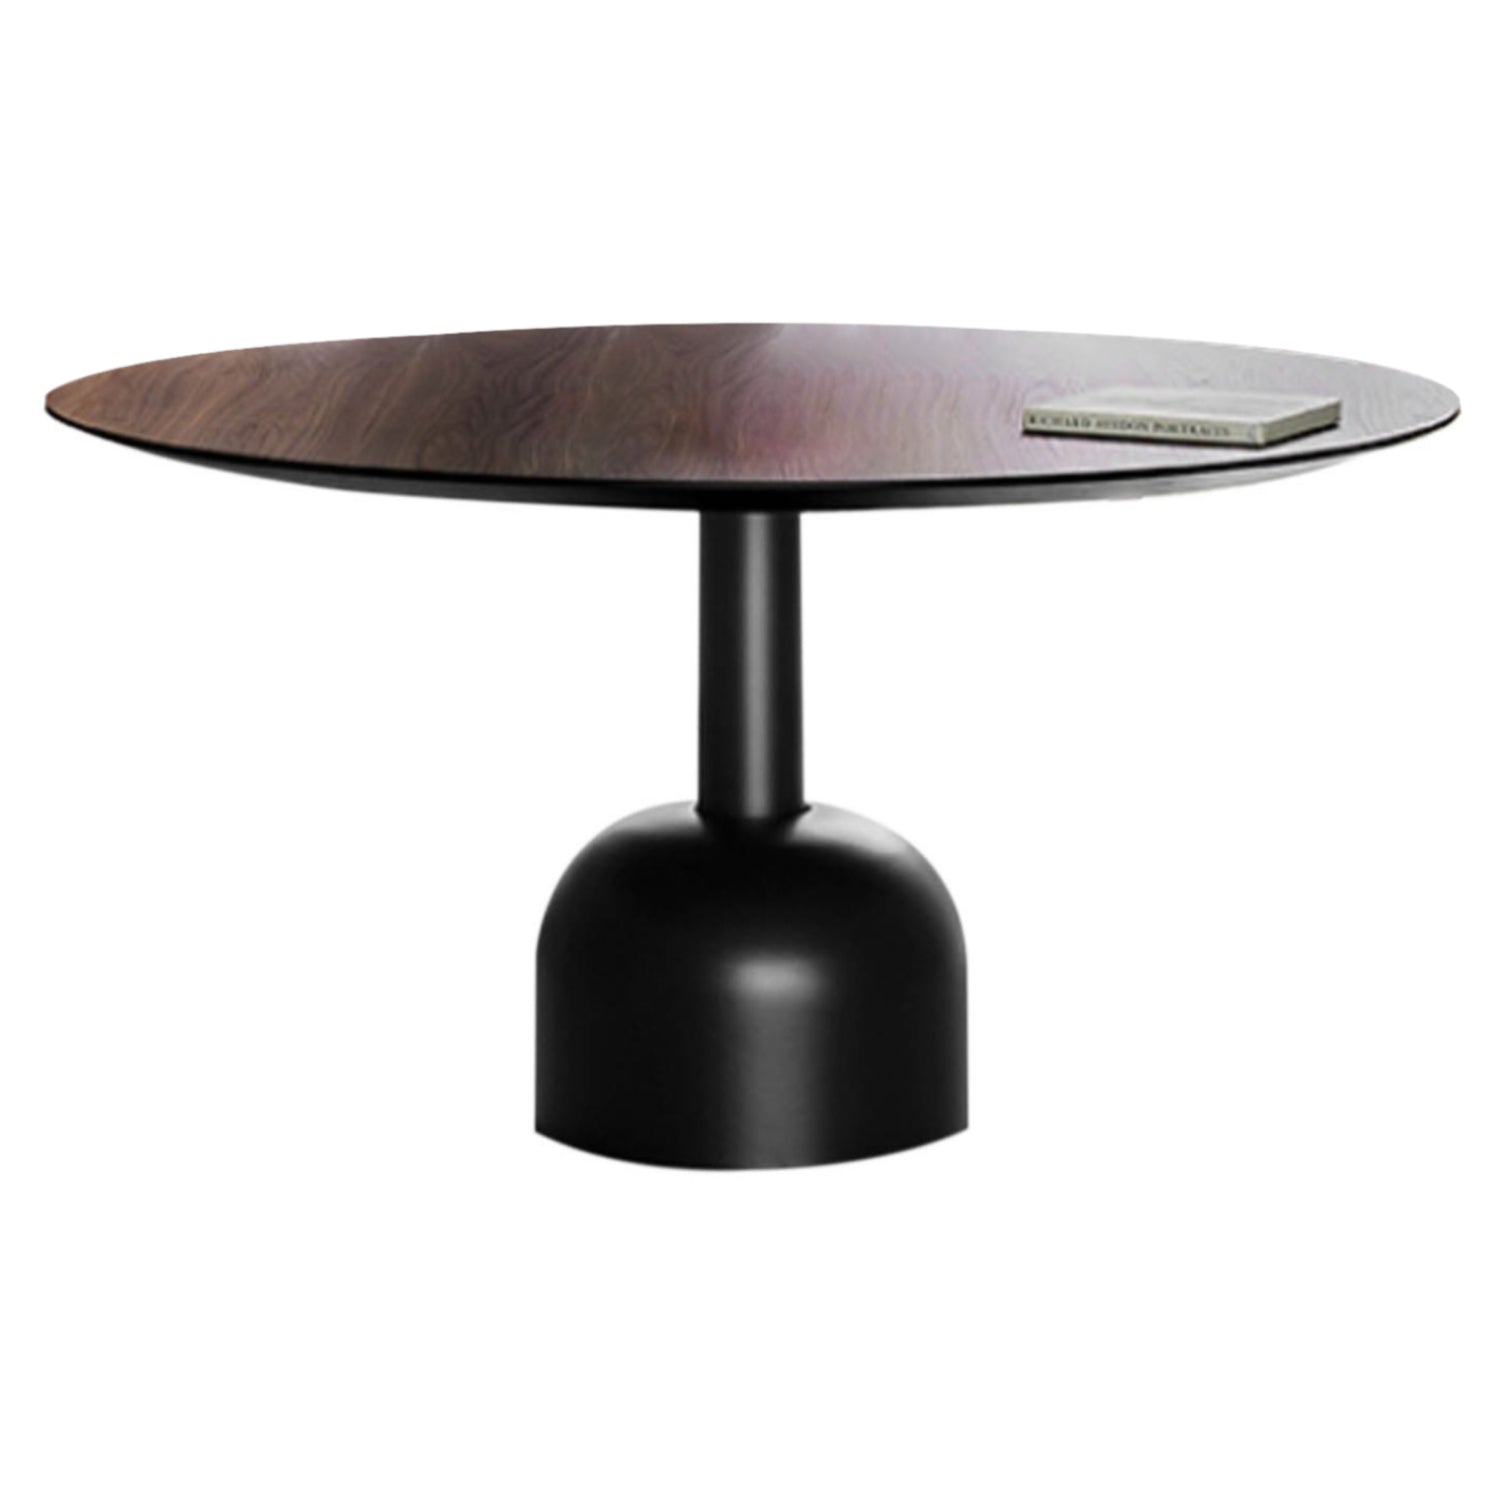 Illo XL Round Dining Table: Canaletto Walnut + Lacquered Black + Lacquered Black